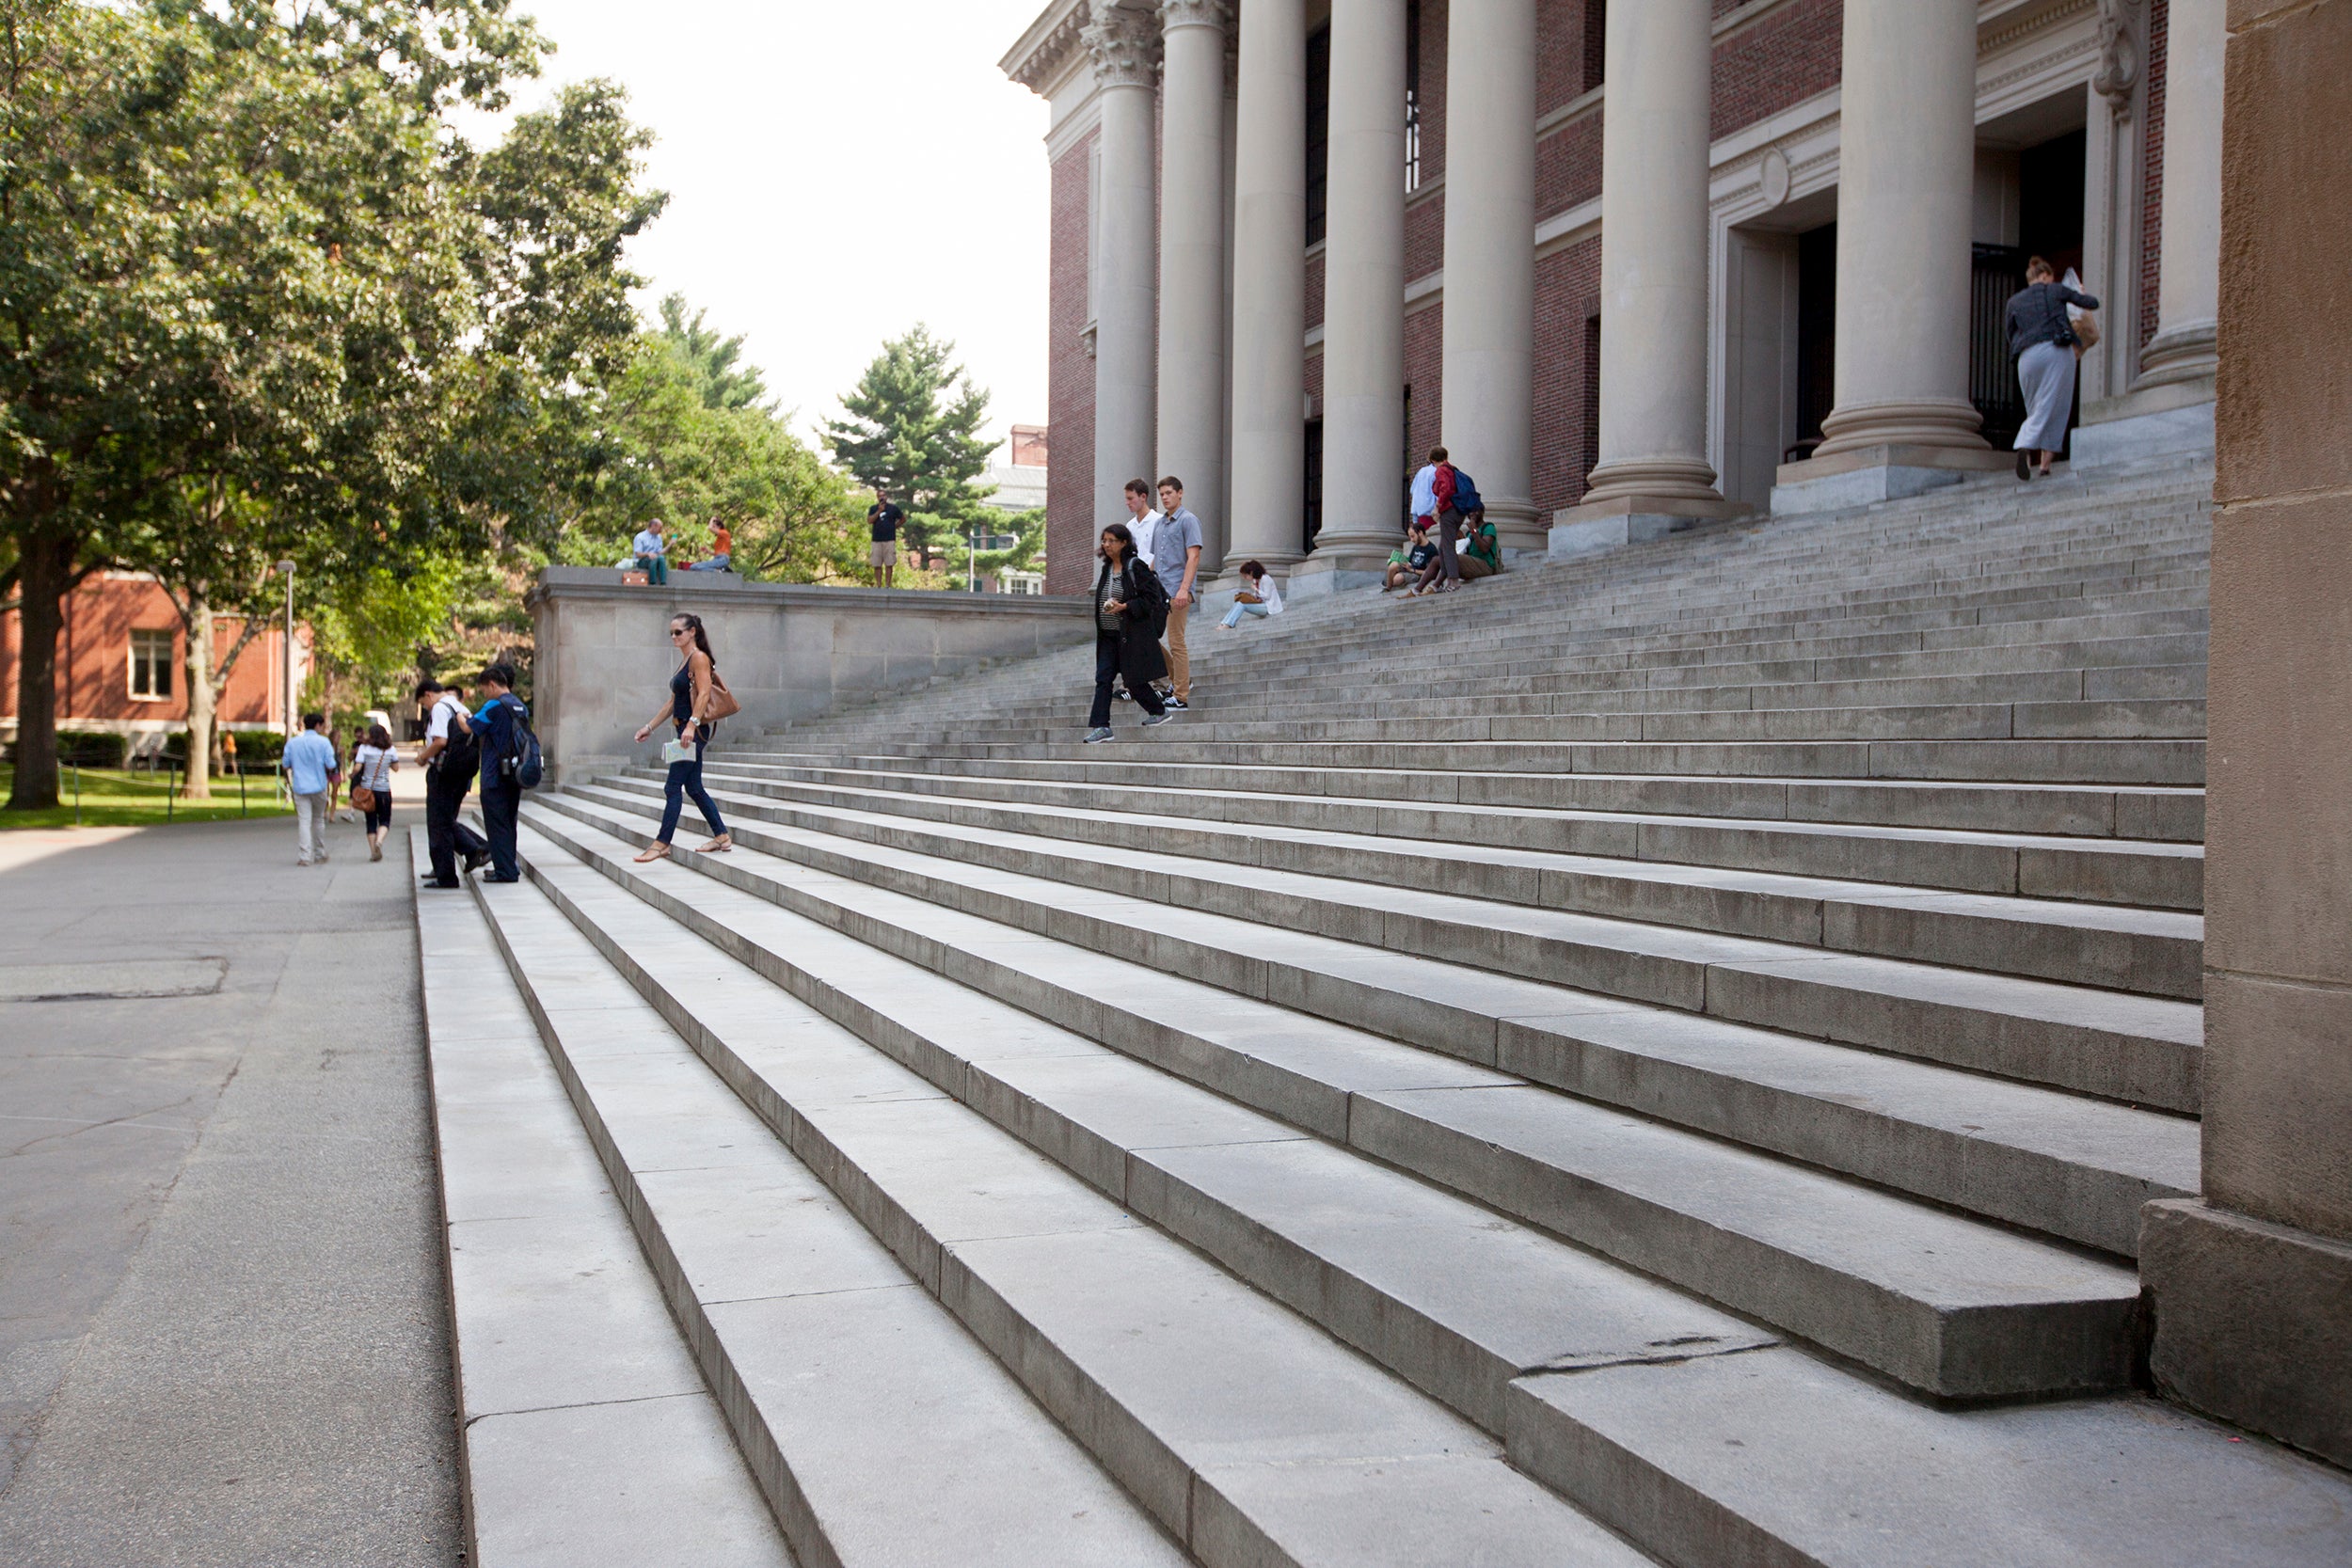 The steps of Widener Library at Harvard University.